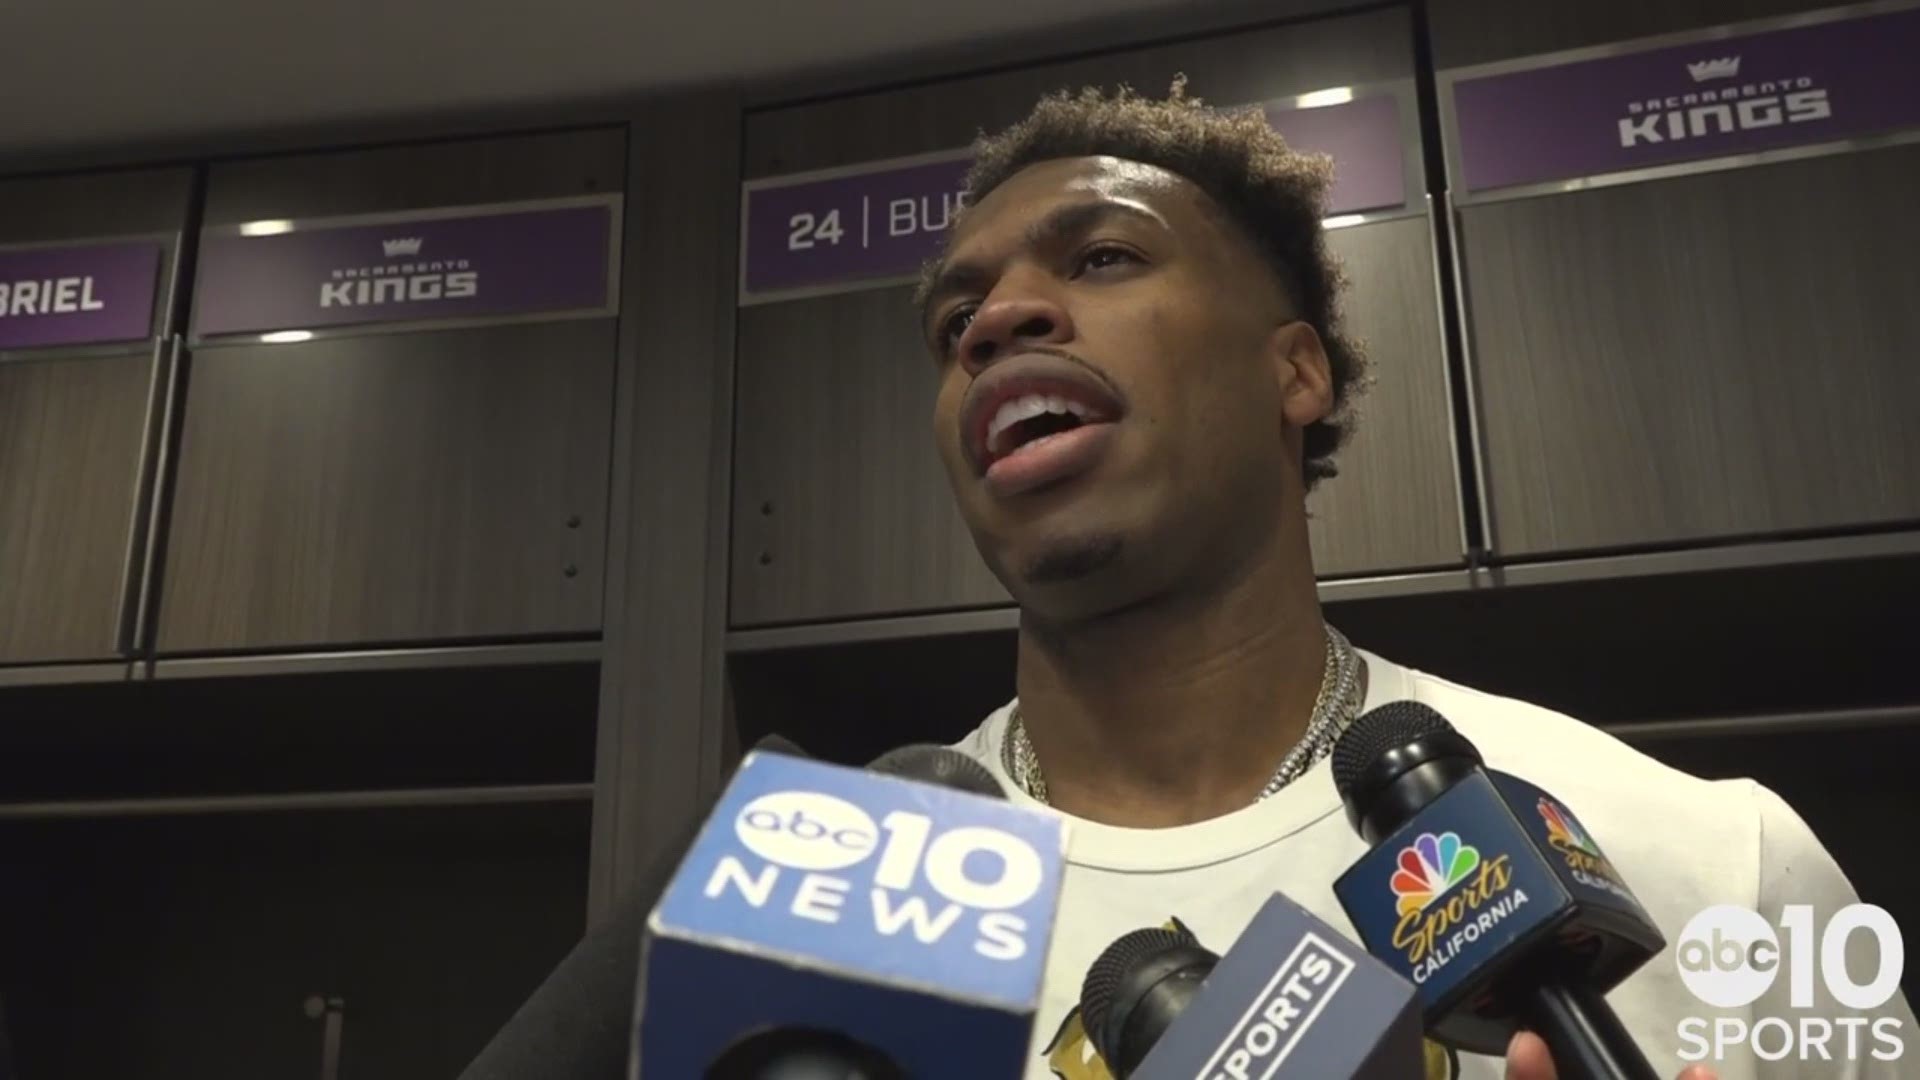 Kings guard Buddy Hield on Saturday's 117-115 loss to the New Orleans Pelicans, Sacramento's trouble with 21 turnovers and dropping nine of their last 10 games.